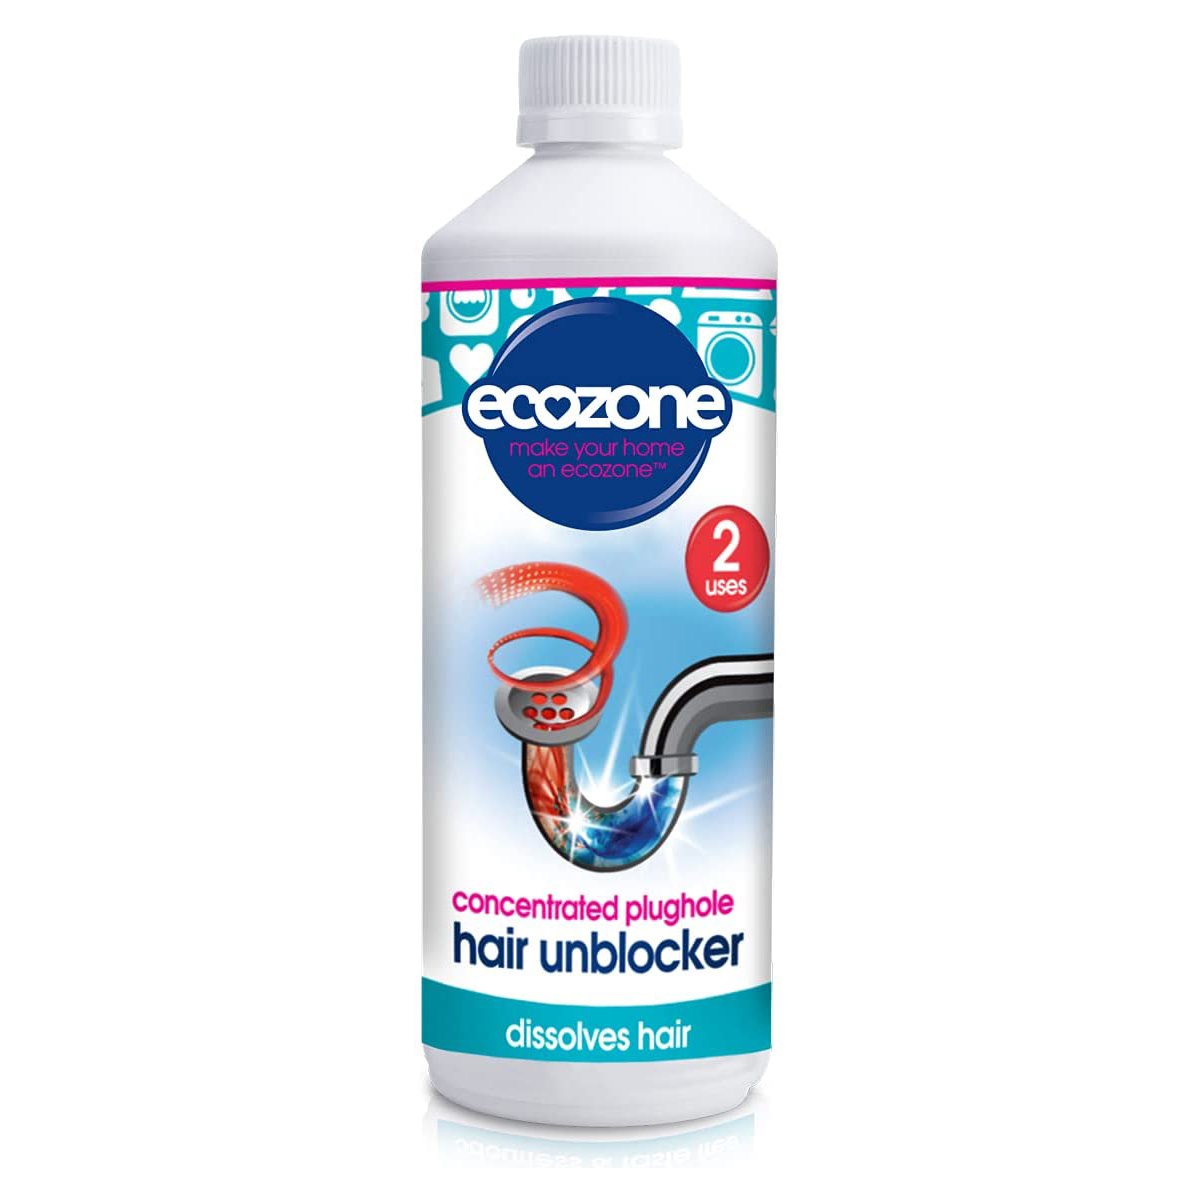 Ecozone Concentrated Plughole Hair Unblocker 250ml